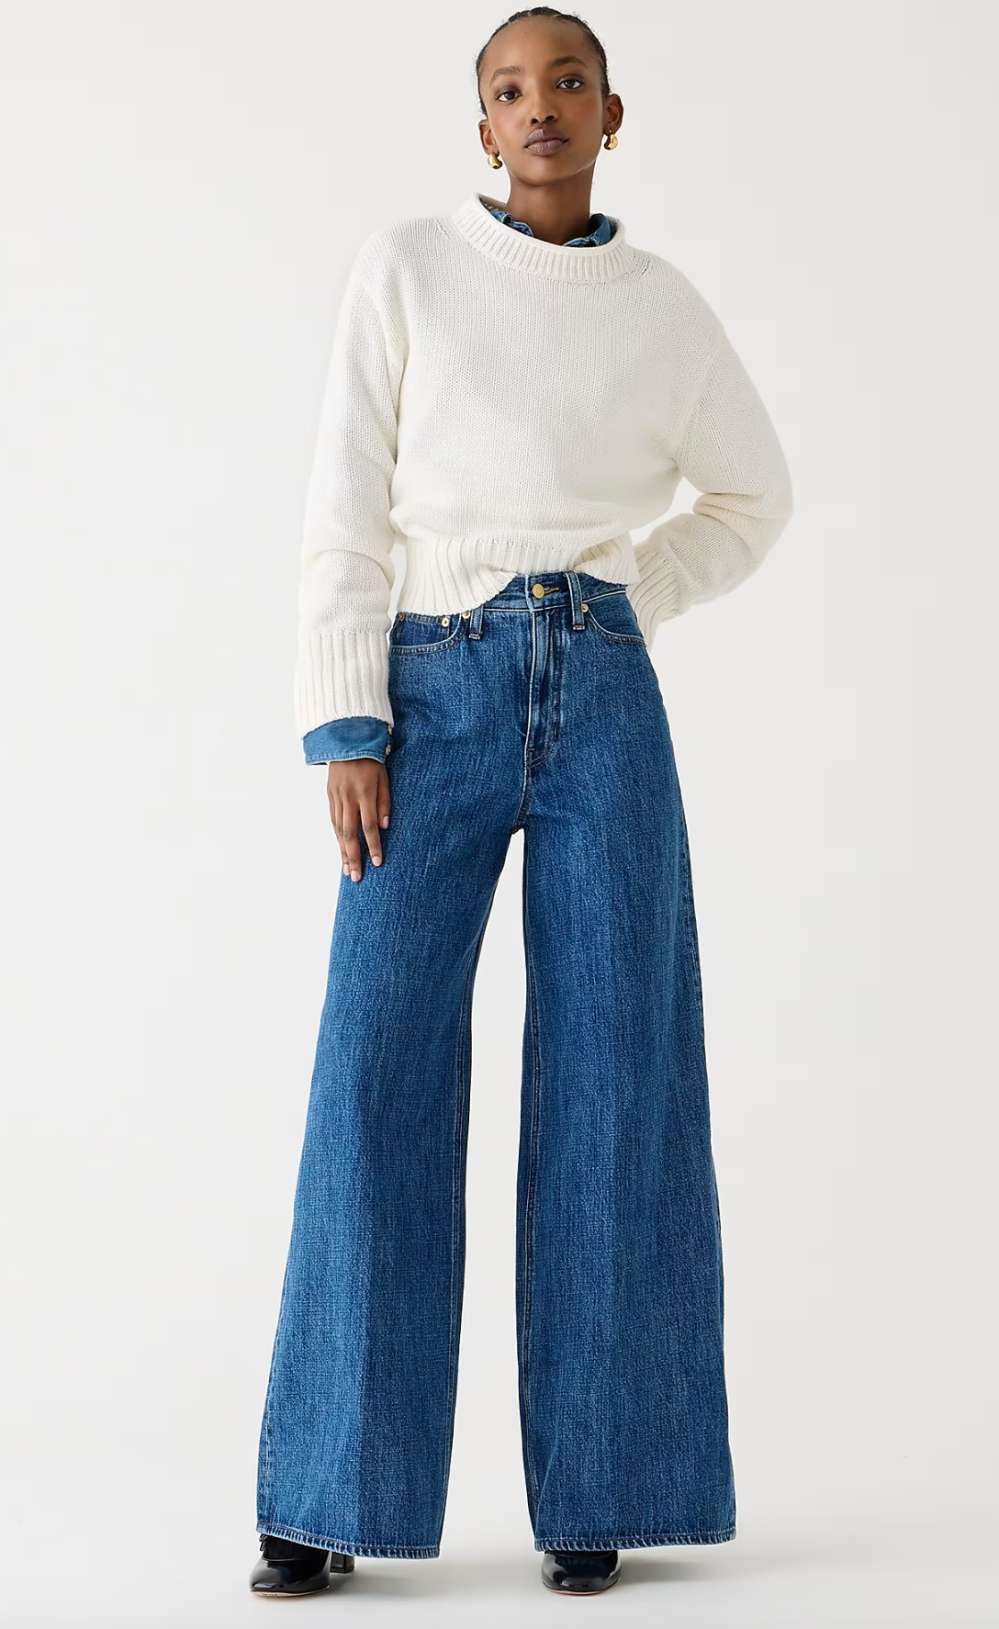 J.Crew High-rise superwide-leg jean in Laura wash